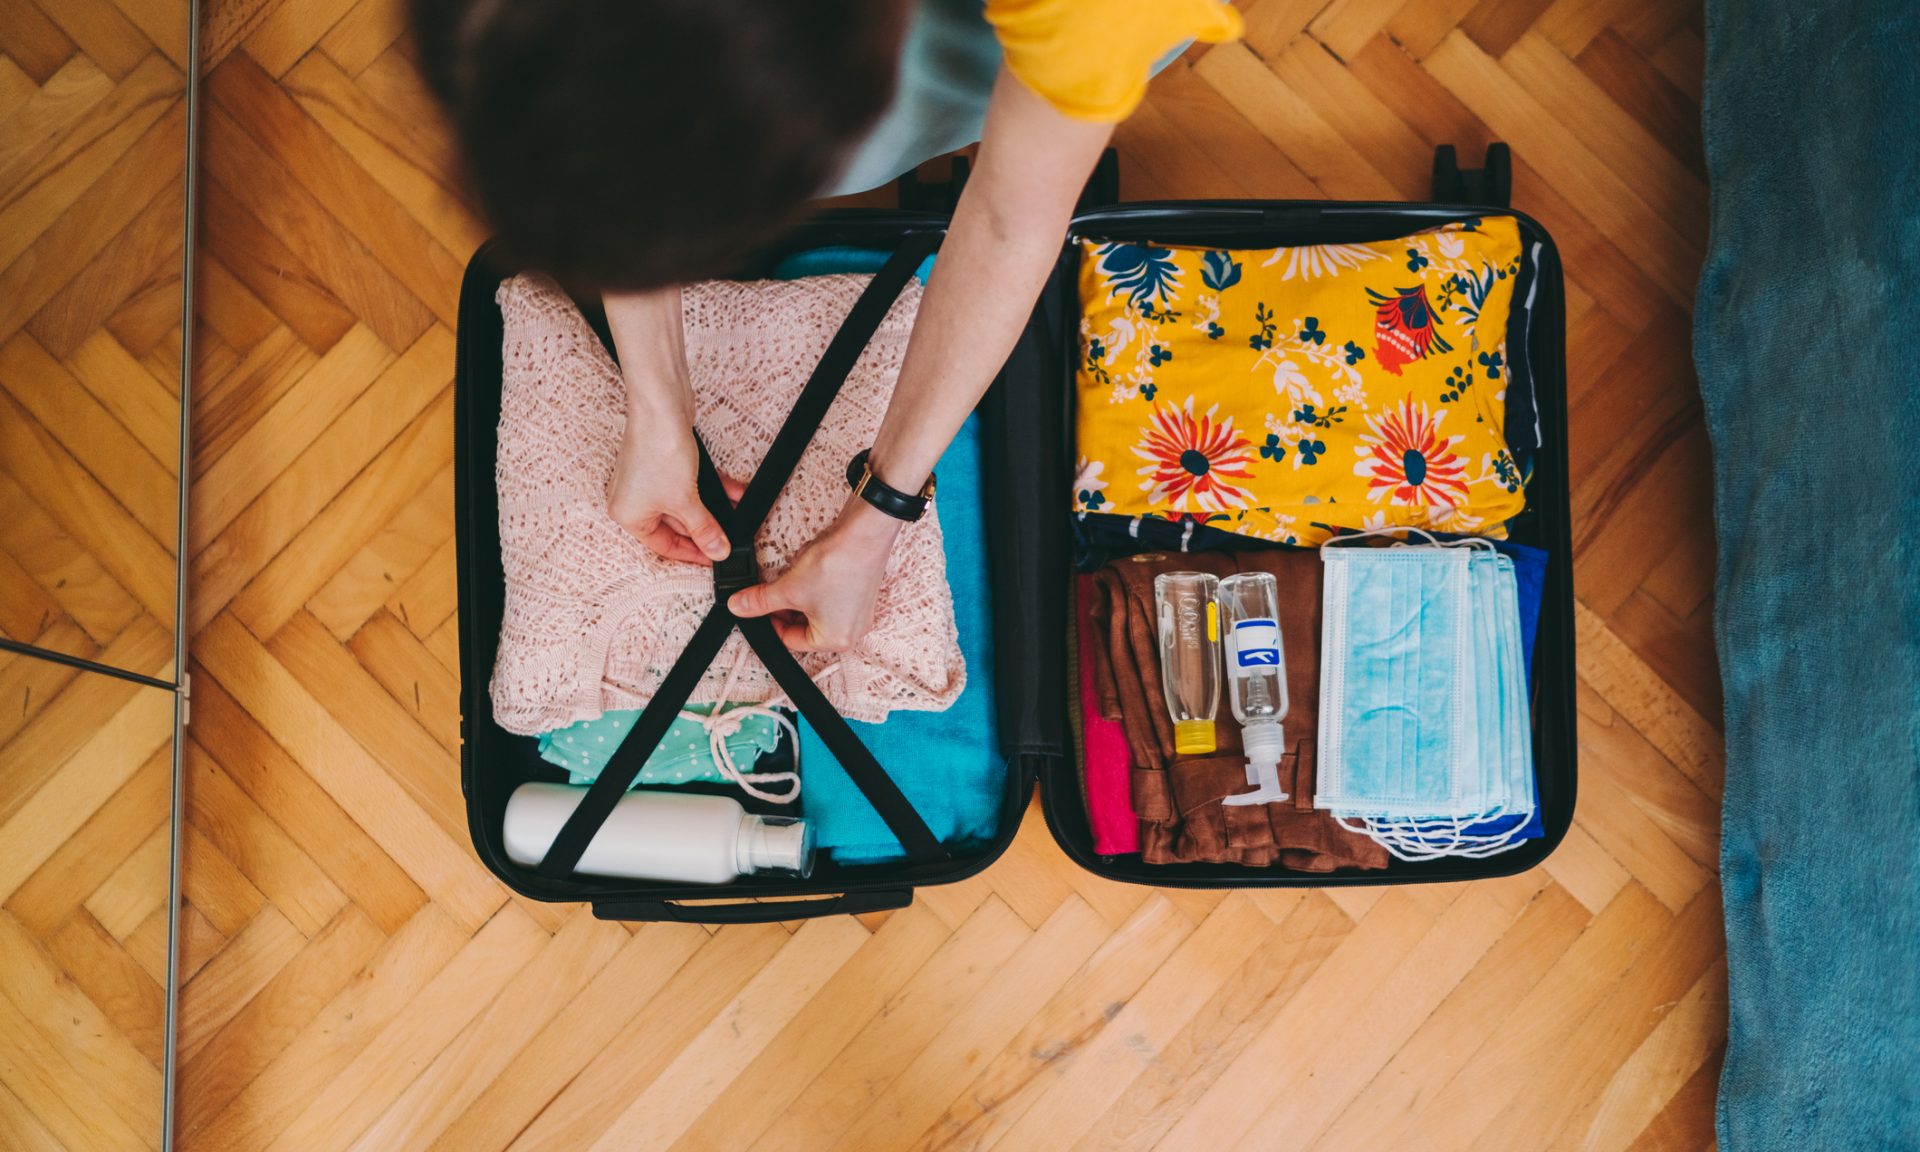 United Airlines Baggage Fees: What You'll Pay - NerdWallet